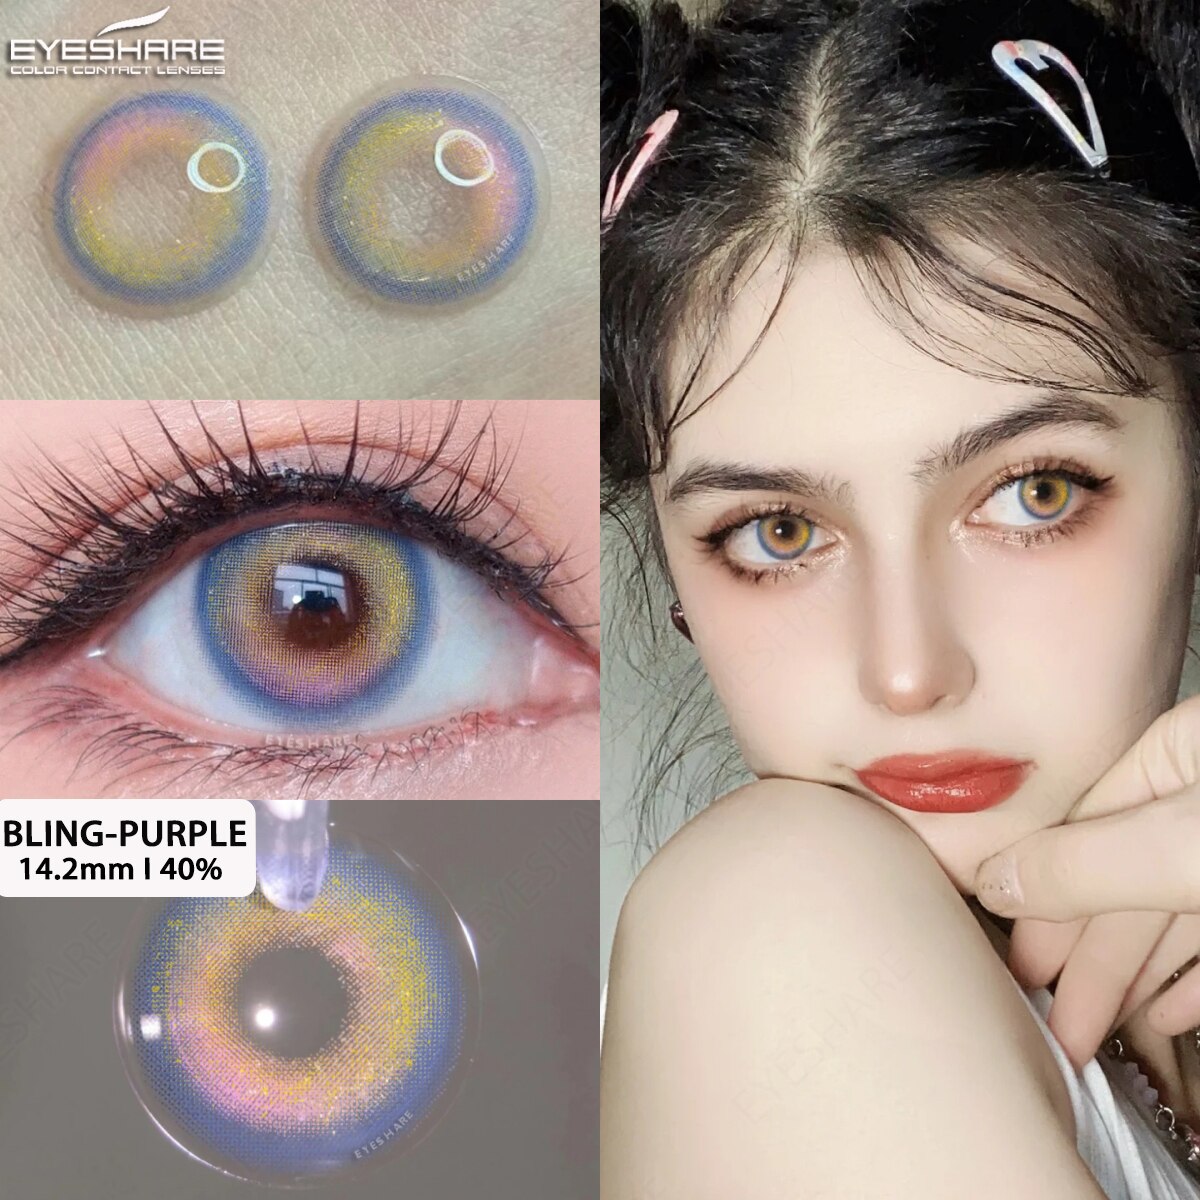 EYEHSARE Color Contact Lenses For Eyes 2pcs Natural Colored Lens Blue Pink Beauty Contact Lenses Eye Yearly Cosmetic Color Lens